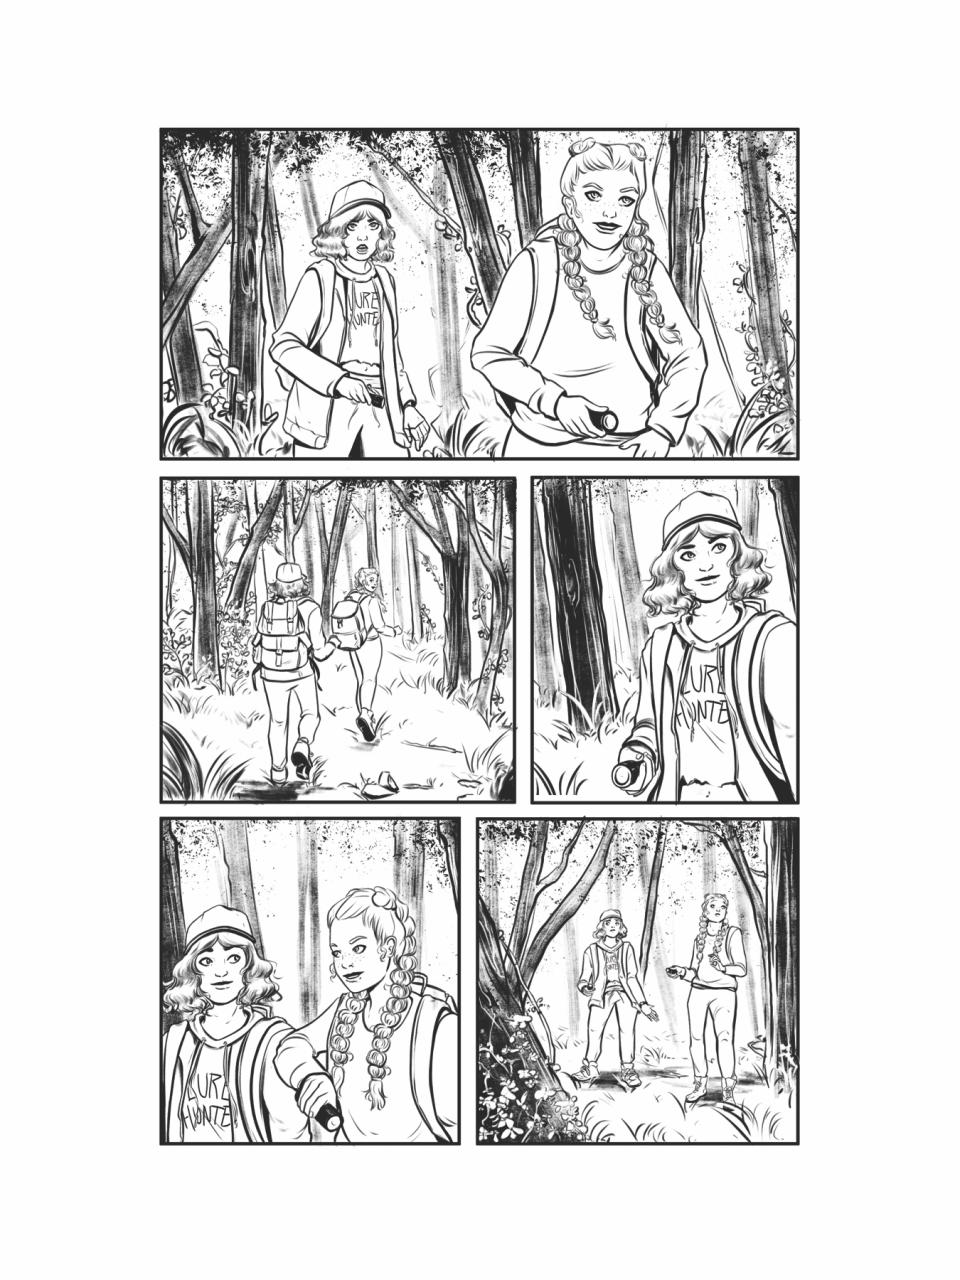 An inked page from Goosebumps Secrets of the Swamp shows two kids exploring a swamp